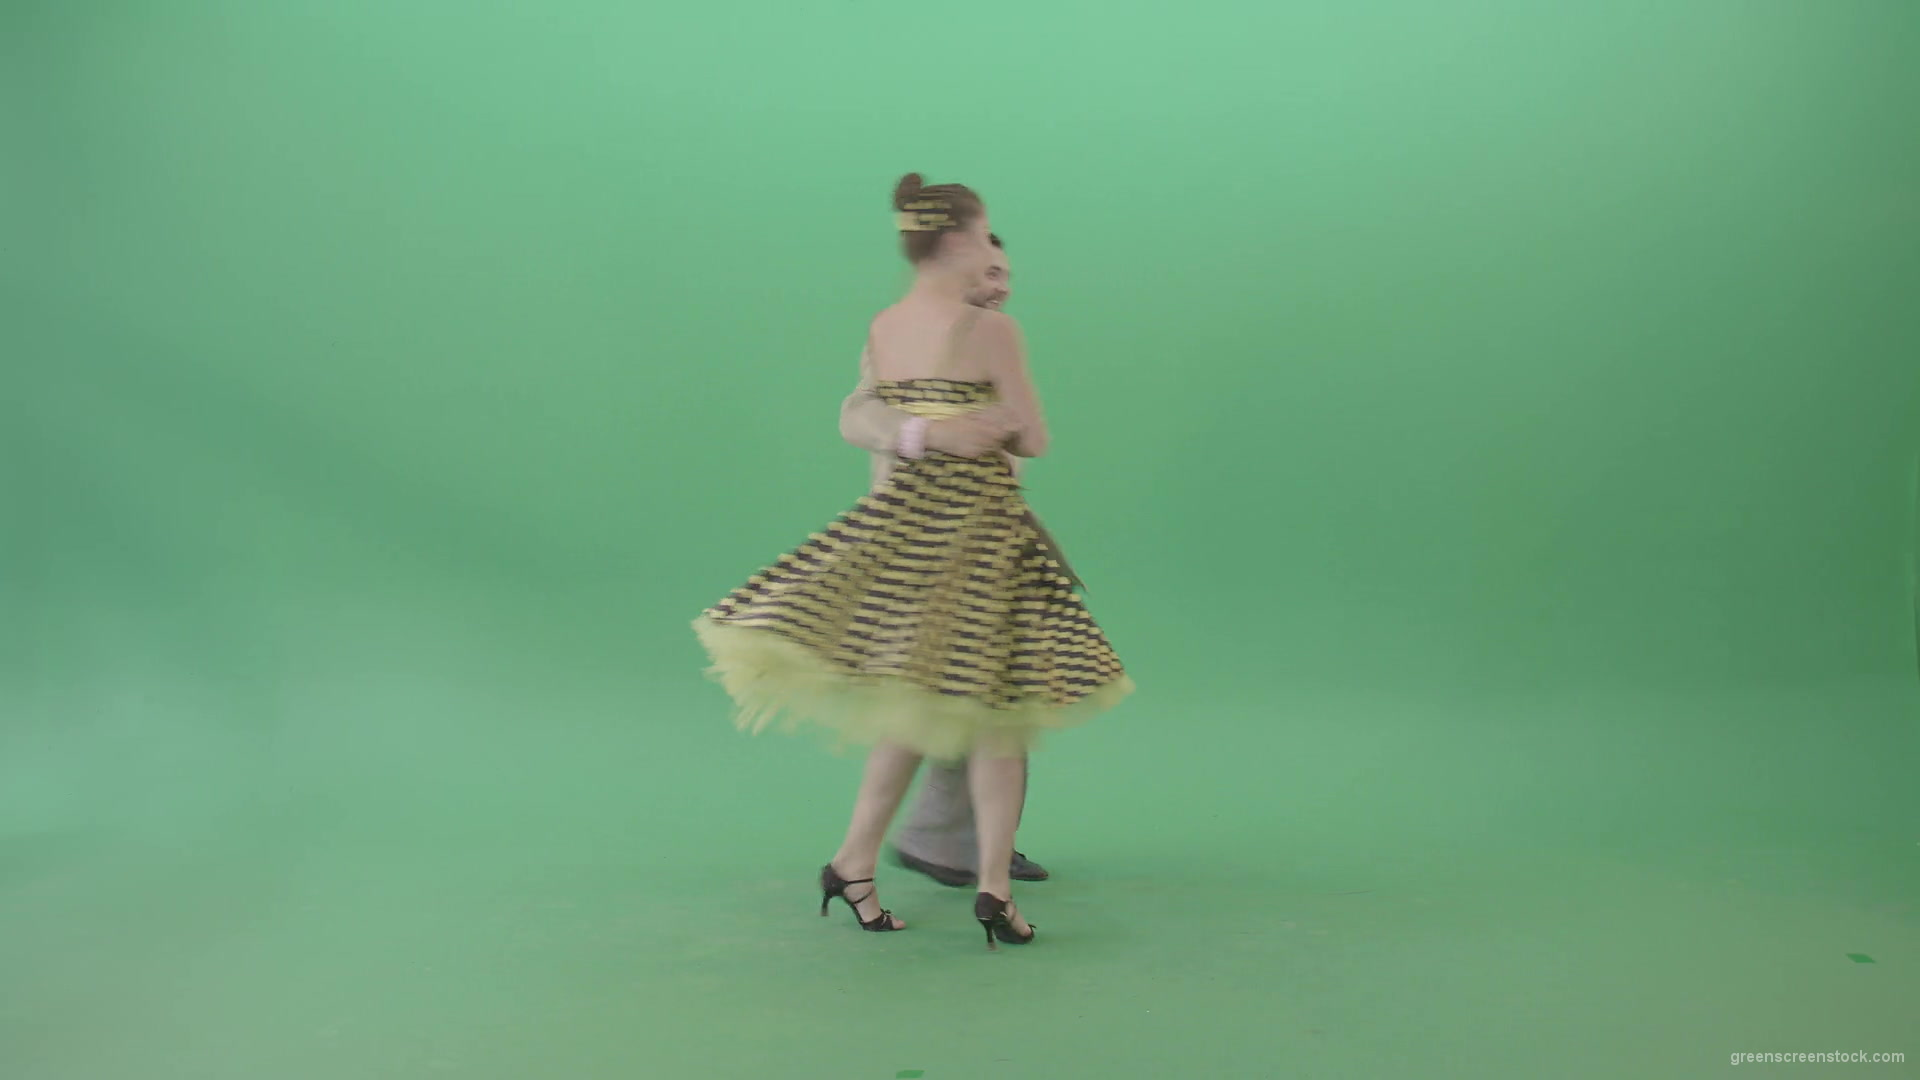 Amazing-couple-dance-Lindy-Hop-and-Rock-and-Roll-isolated-on-Green-Screen-4K-Video-Footage-1920_009 Green Screen Stock